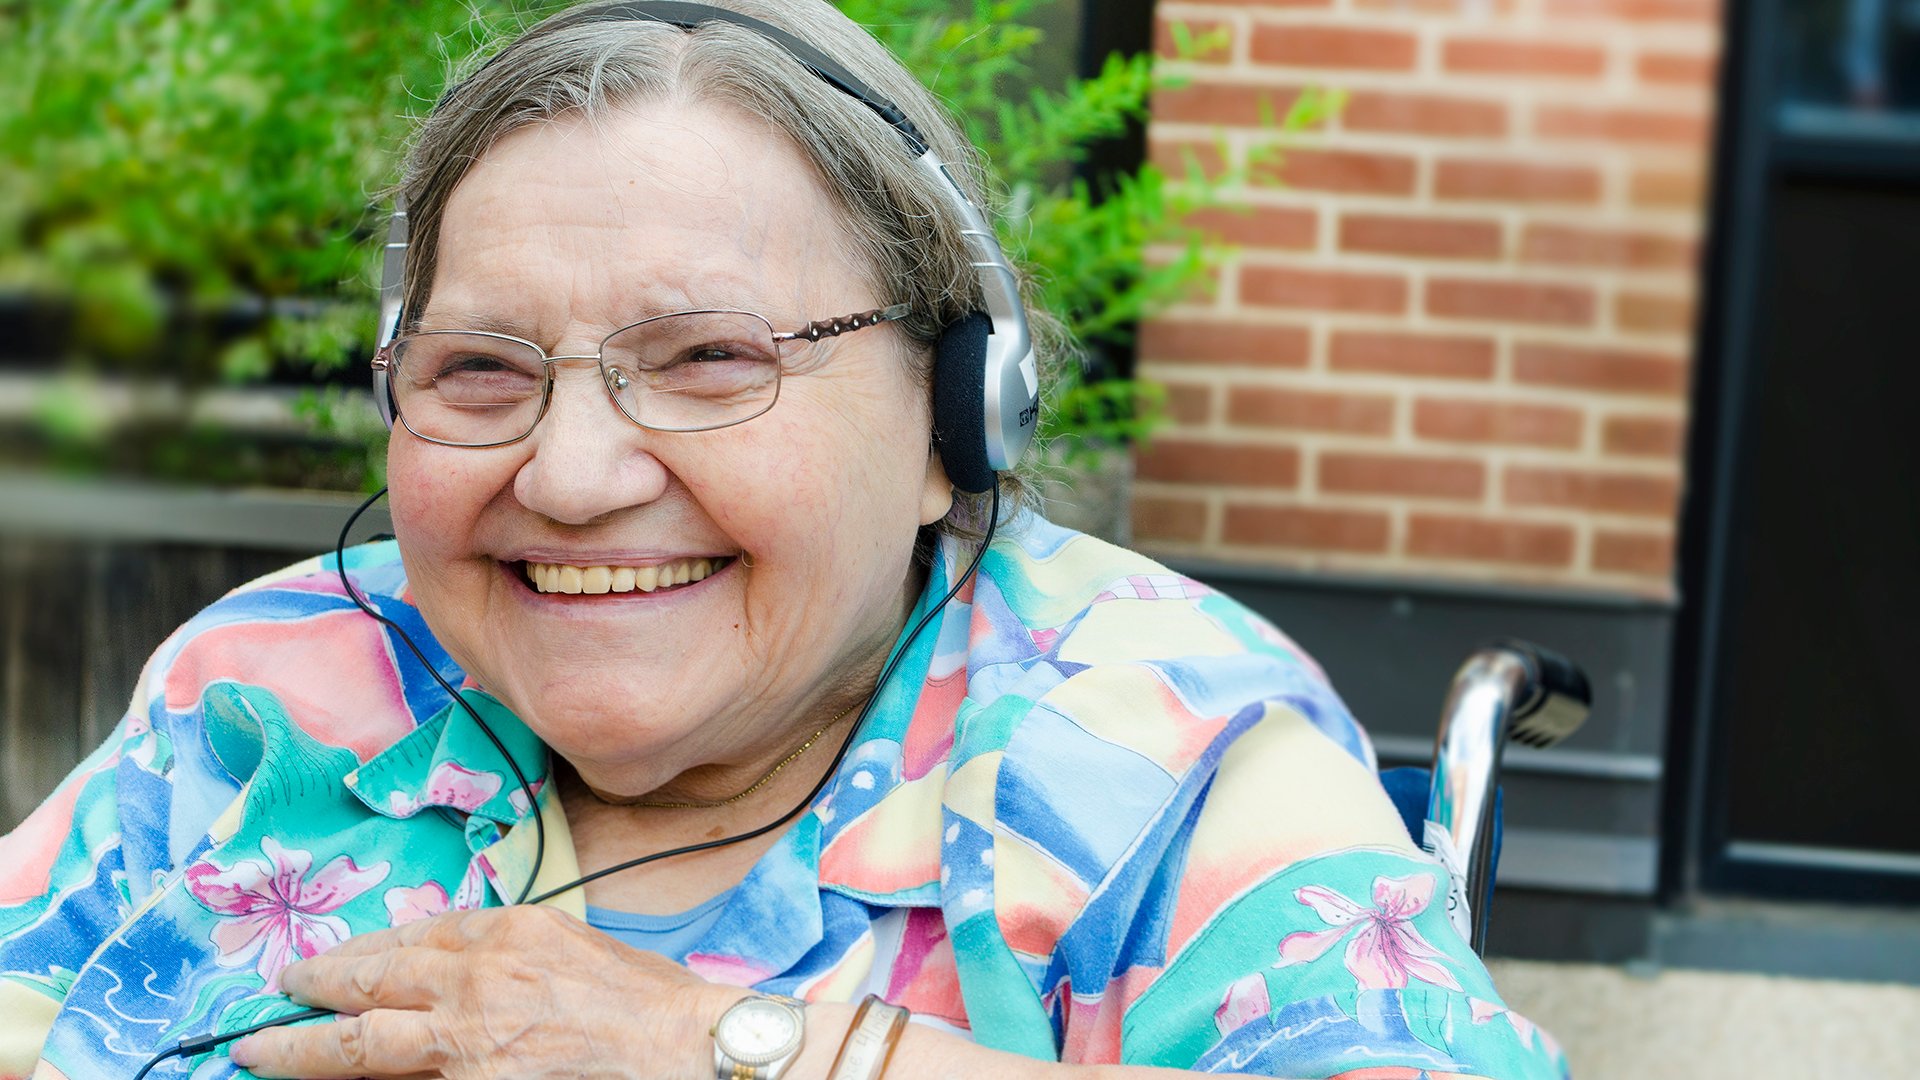 elderly woman wearing headphones and smiling while listening to music